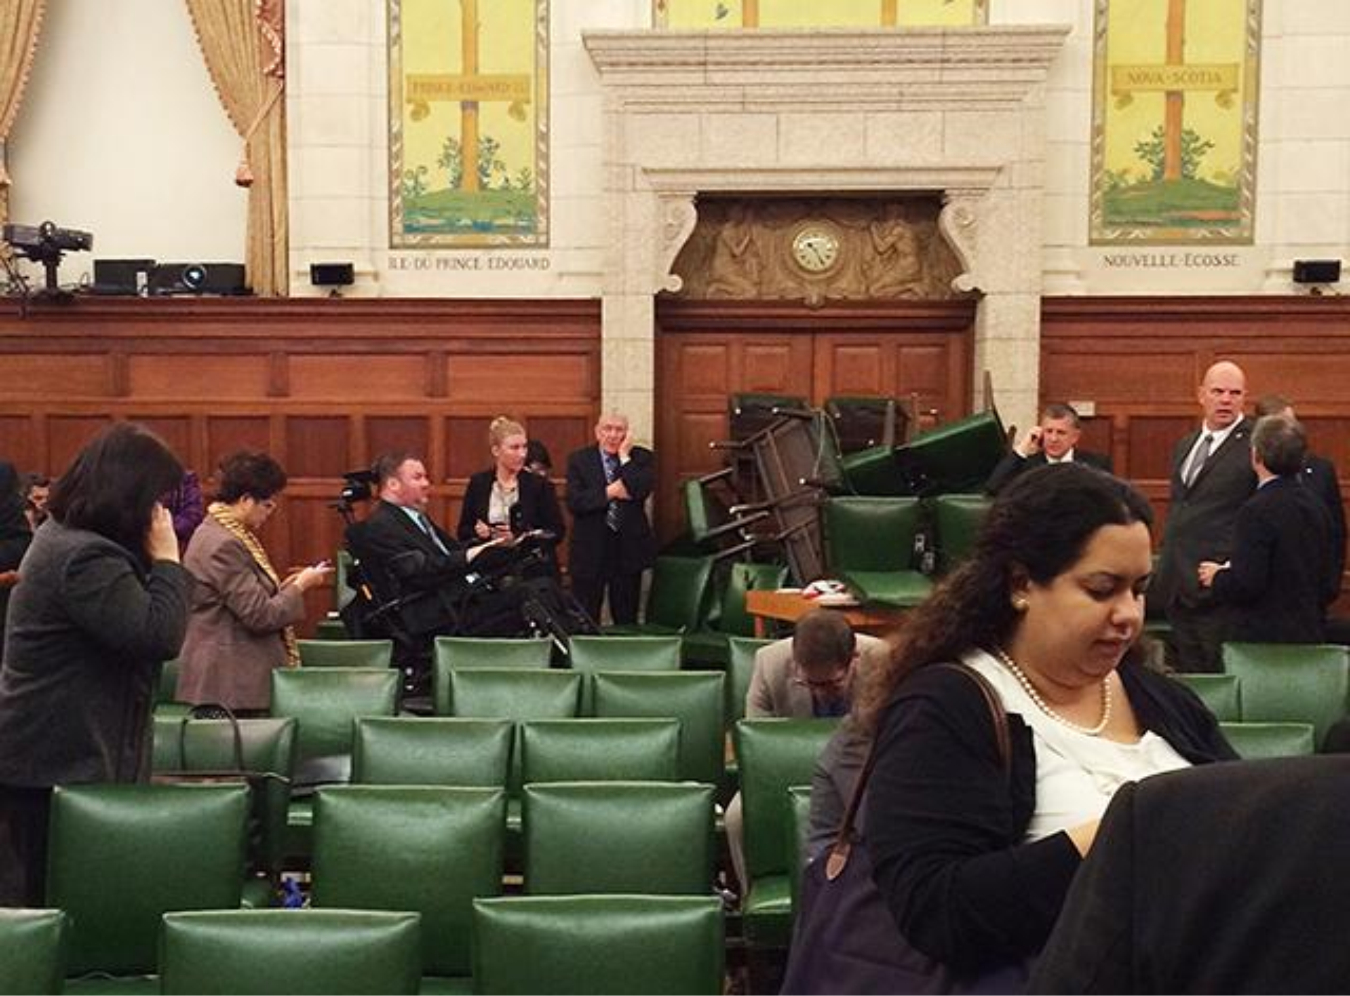 Security: Parliament Hill Style - Members of Parliament barricade the doors